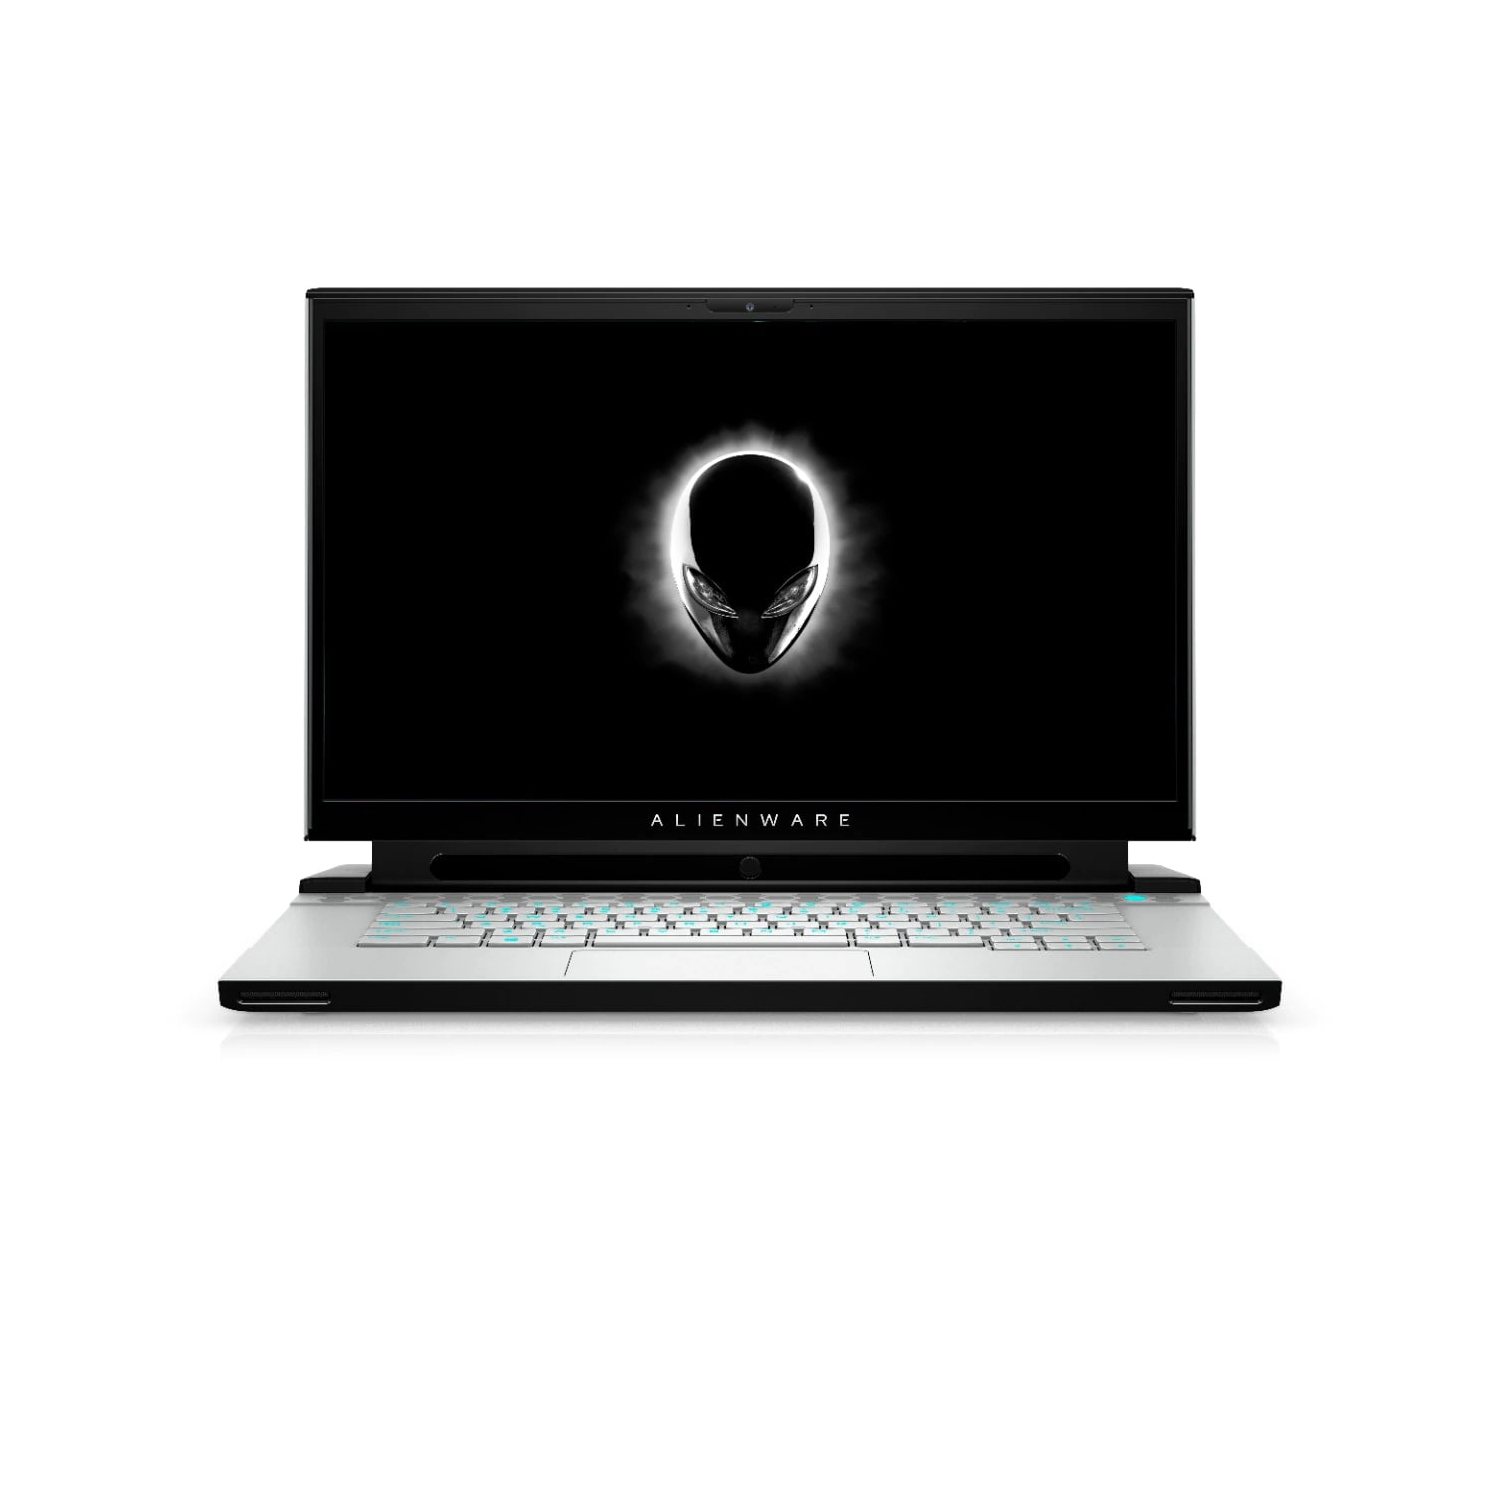 Refurbished (Excellent) - Dell Alienware m15 R3 Gaming Laptop (2020) | 15.6" FHD | Core i7 - 256GB SSD - 16GB RAM | 6 Cores @ 5 GHz - 10th Gen CPU Certified Refurbished